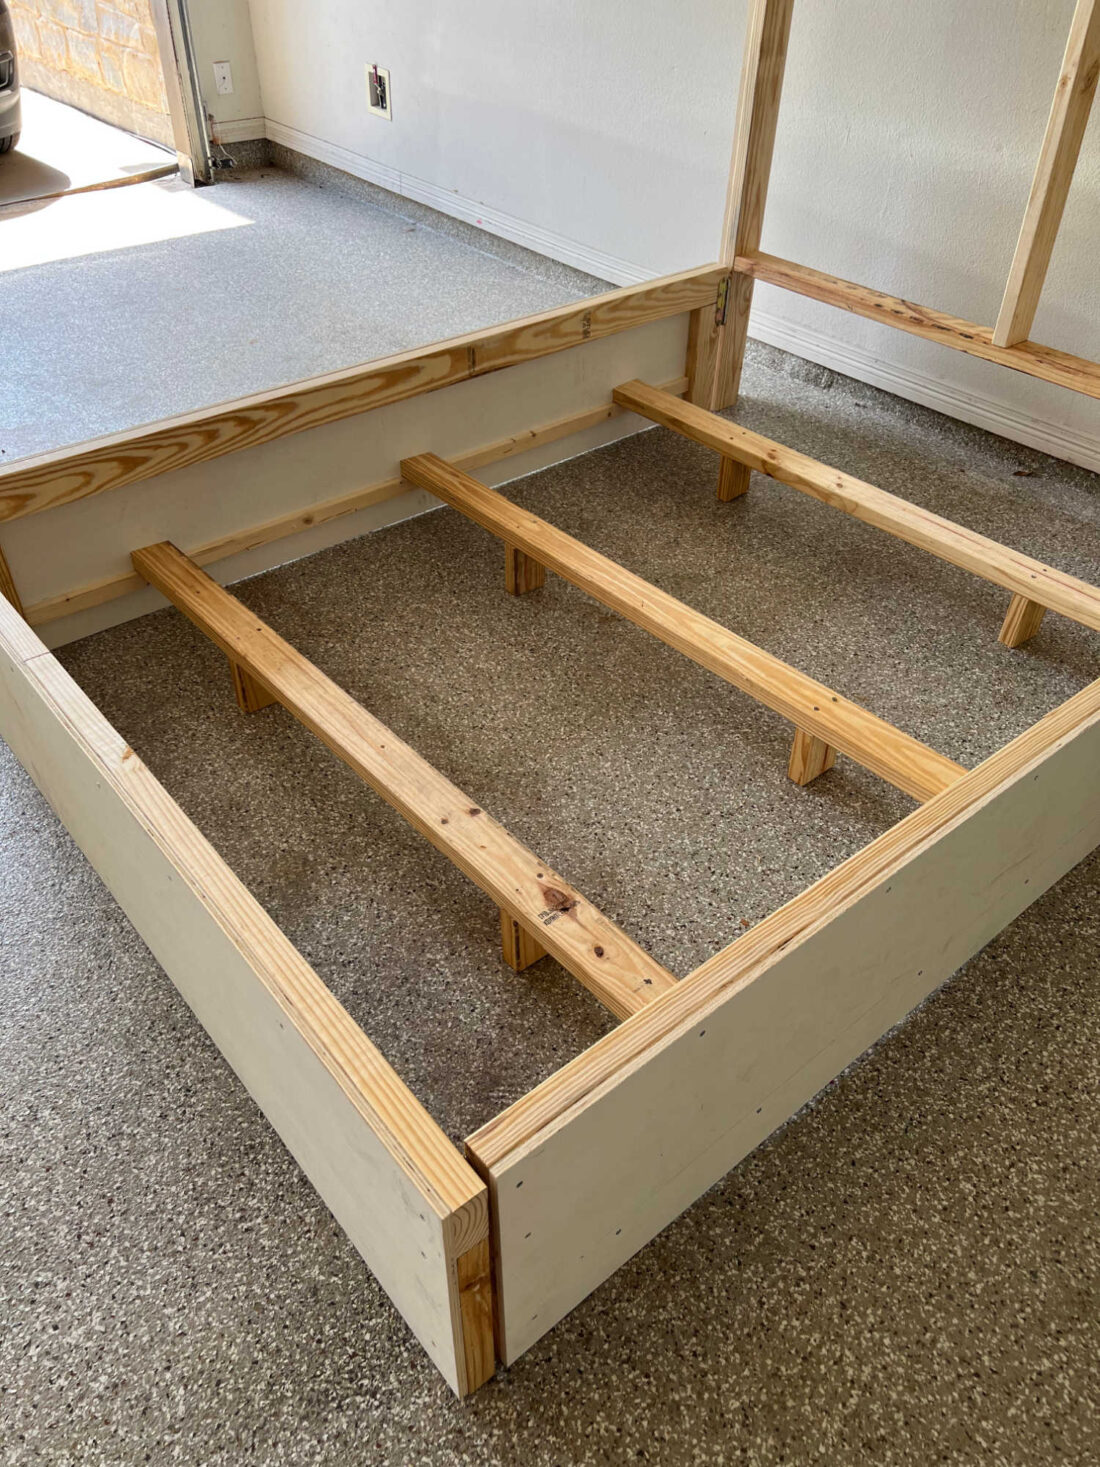 DIY bed supports